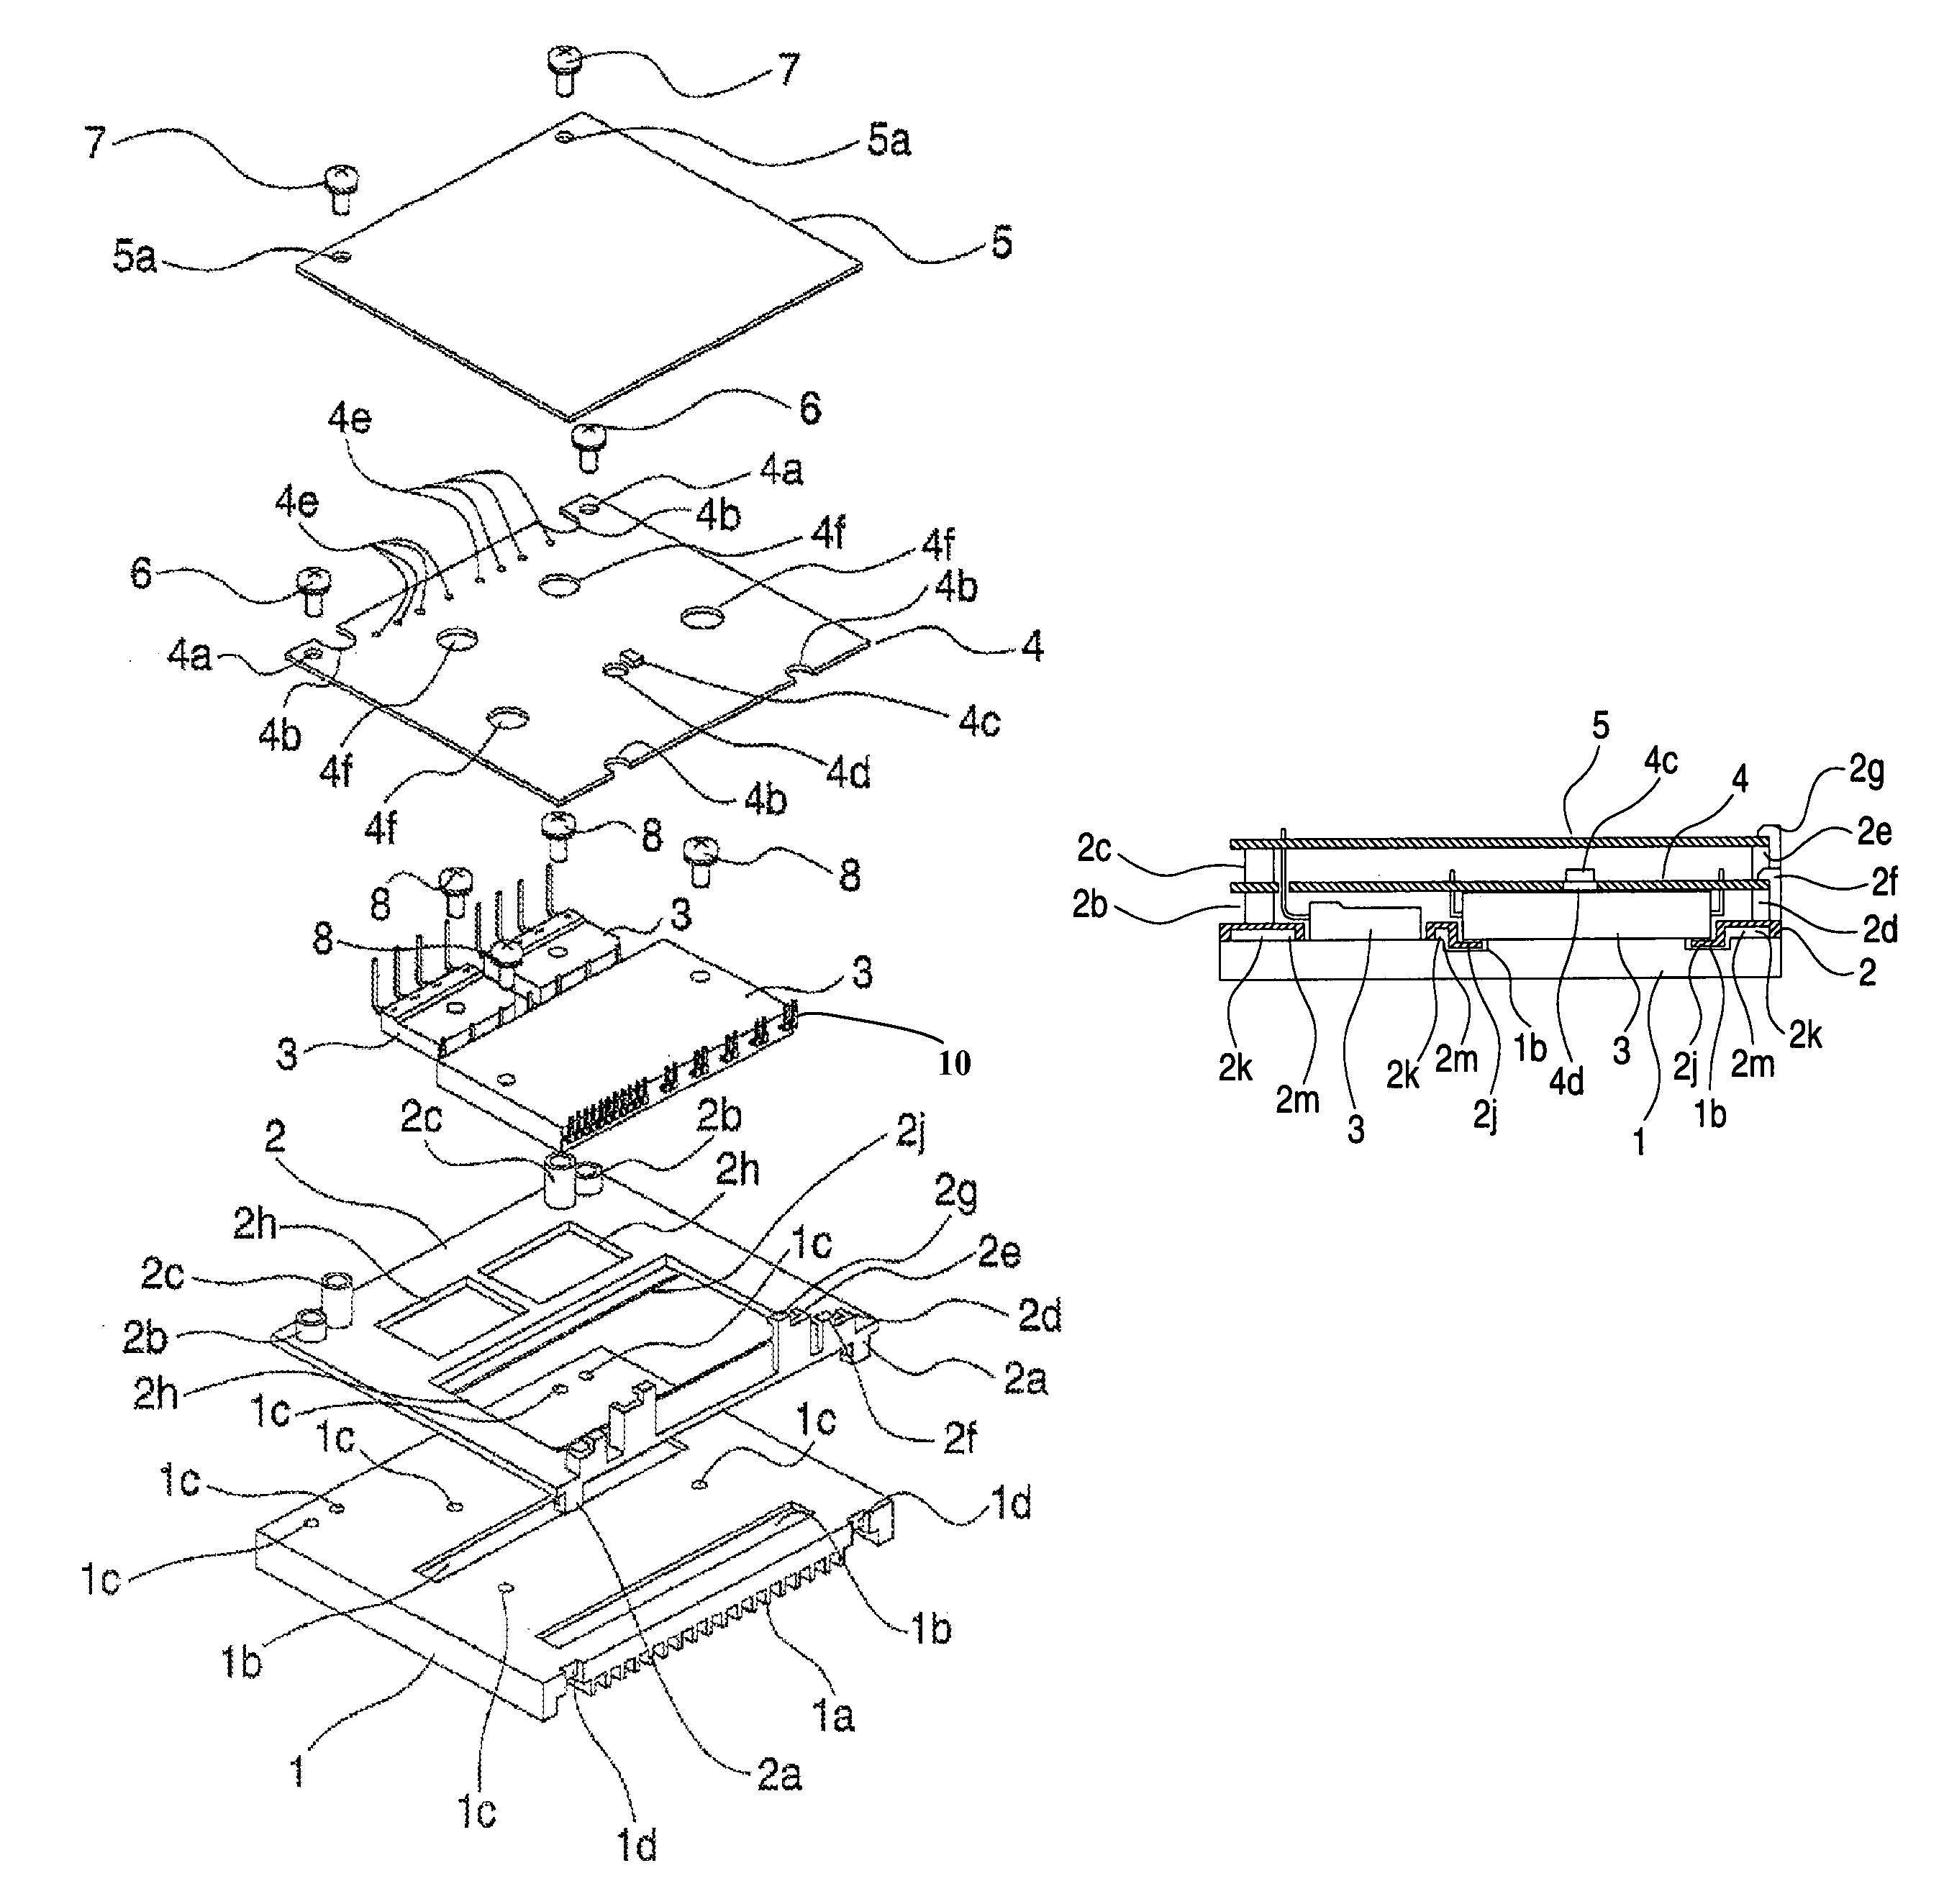 Motor control apparatus and method of assembling motor control apparatus